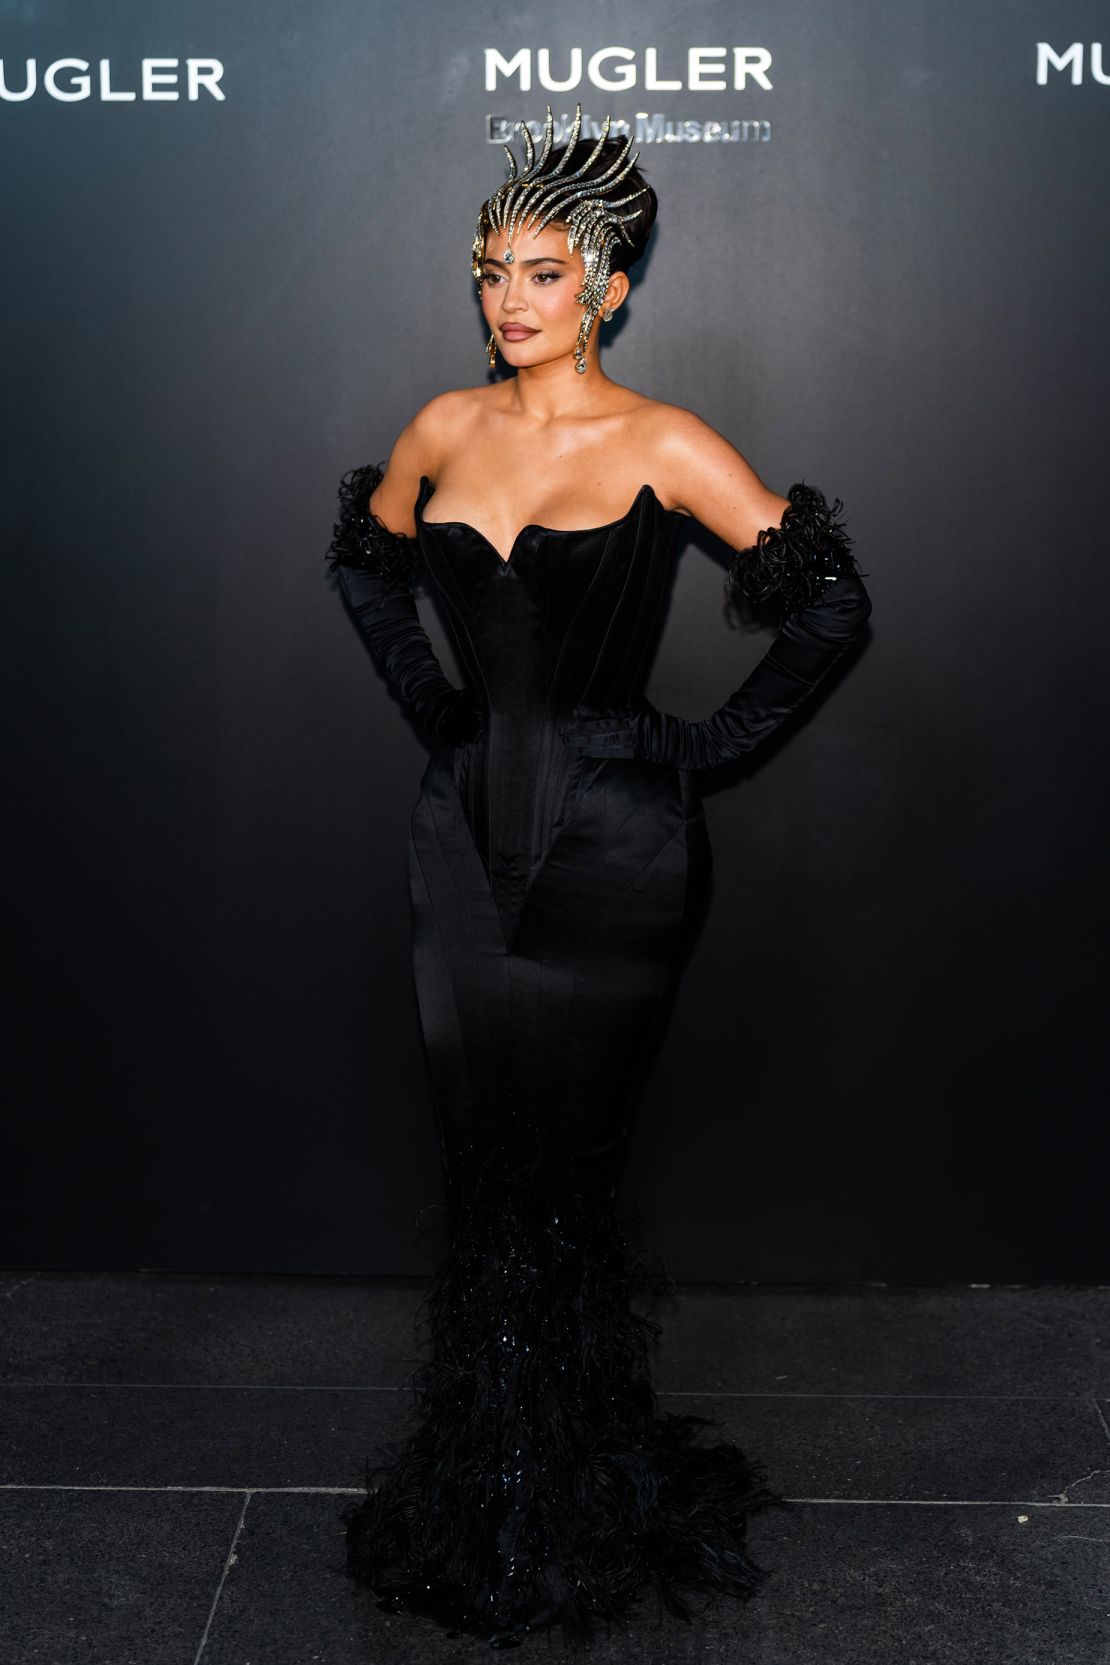 Kylie Jenner picked her outfit for the "Thierry Mugler: Couturissime" exhibition opening night in New York straight off the museum mannequin.